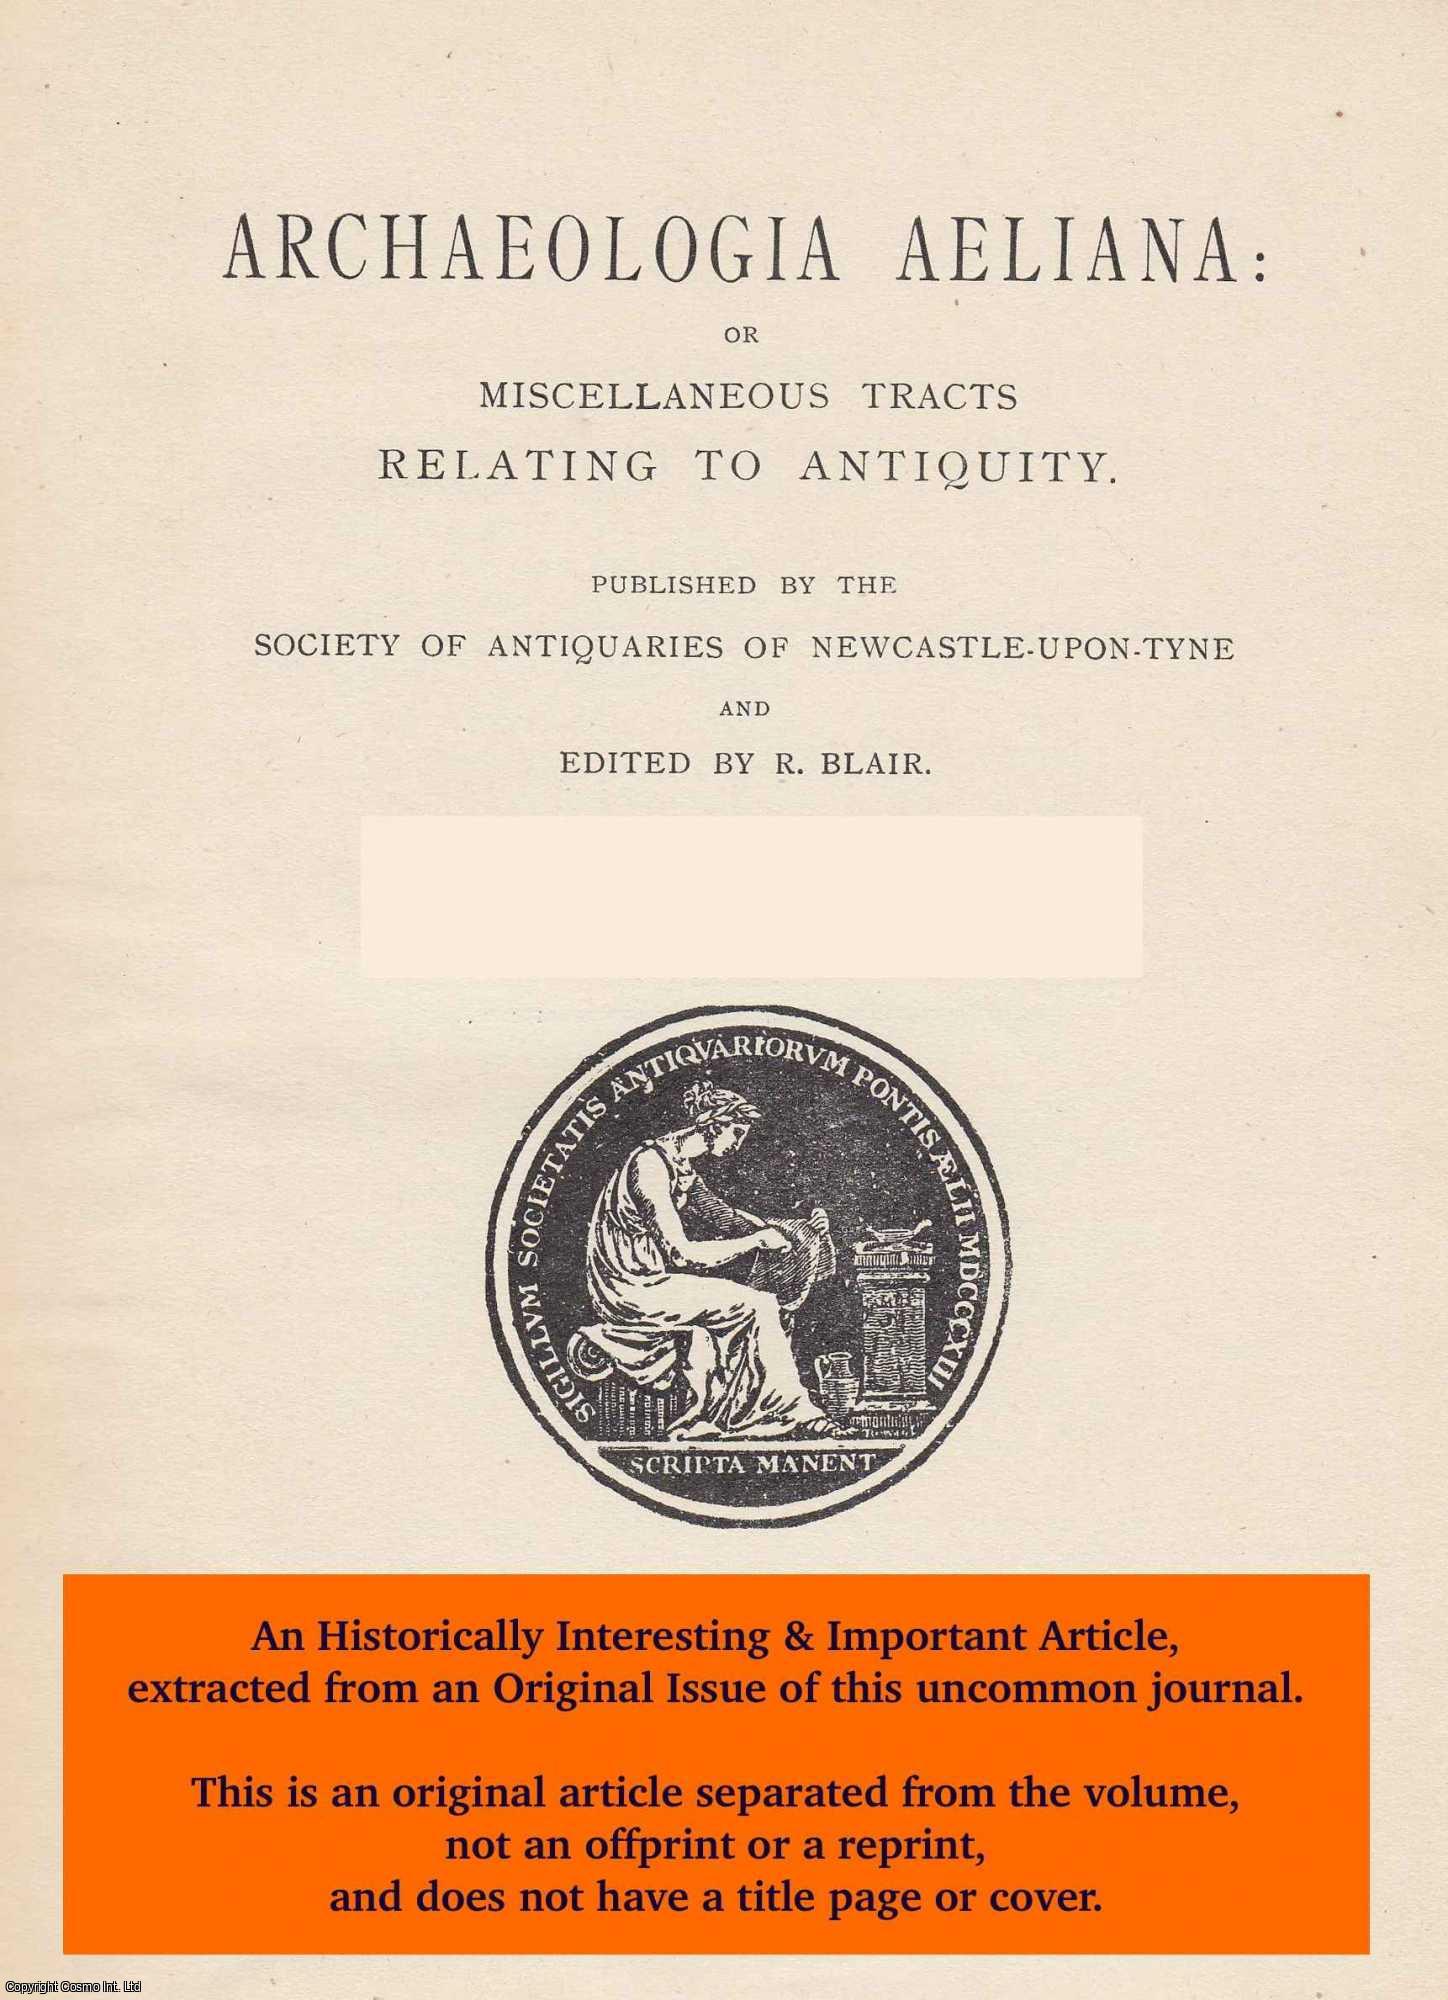 H. L. Honeyman, H. L. - Three Jacobean Houses. (Washington Old Hall, Ovingham Vicarage and Aydon White House). An original article from The Archaeologia Aeliana: or Miscellaneous Tracts Relating to Antiquity, 1953.